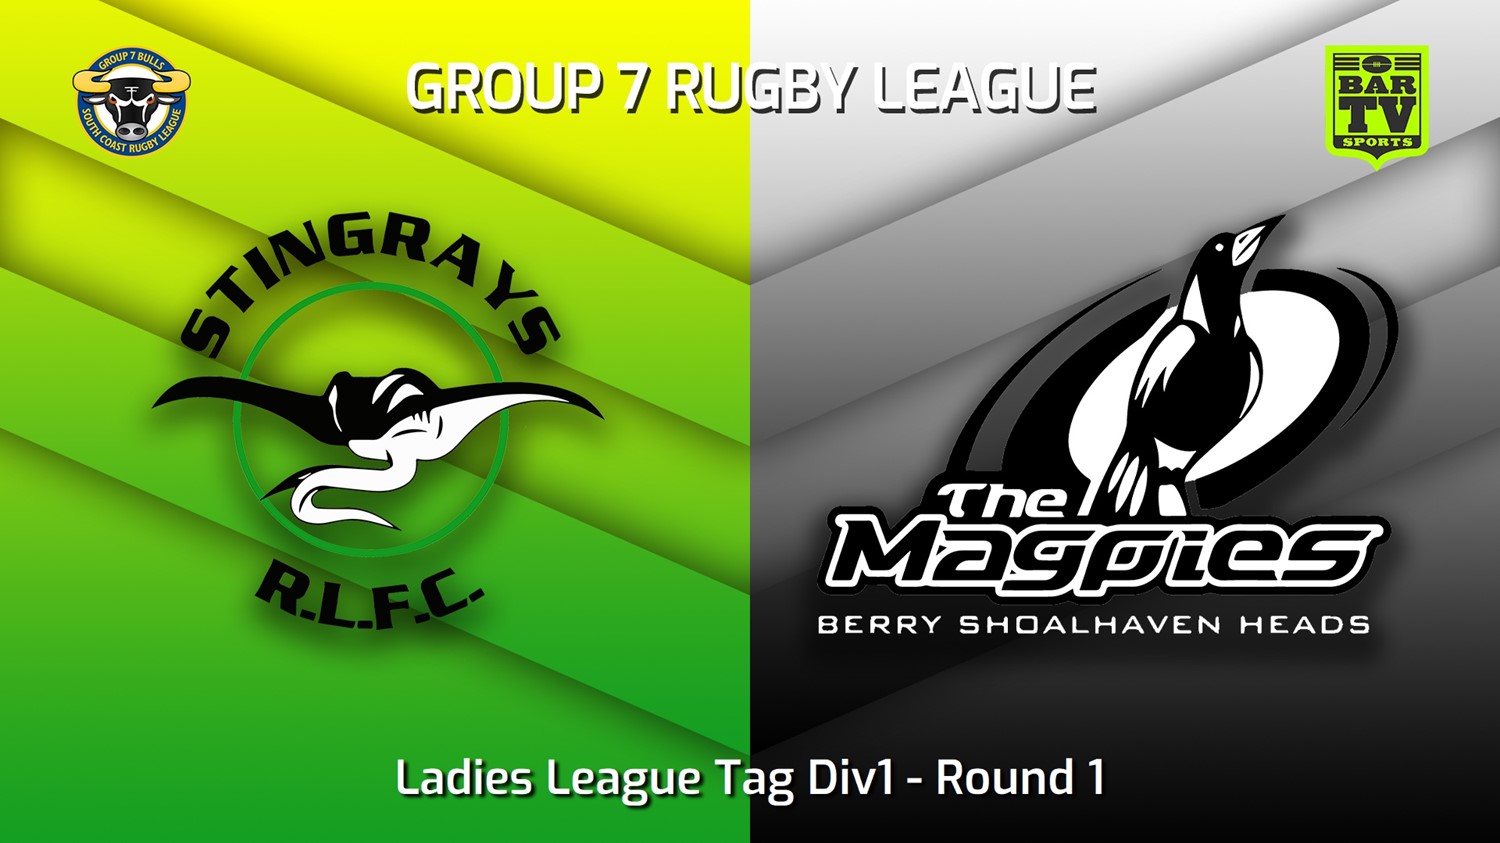 220730-South Coast Round 1 - Ladies League Tag Div1 - Stingrays of Shellharbour v Berry-Shoalhaven Heads Magpies Slate Image